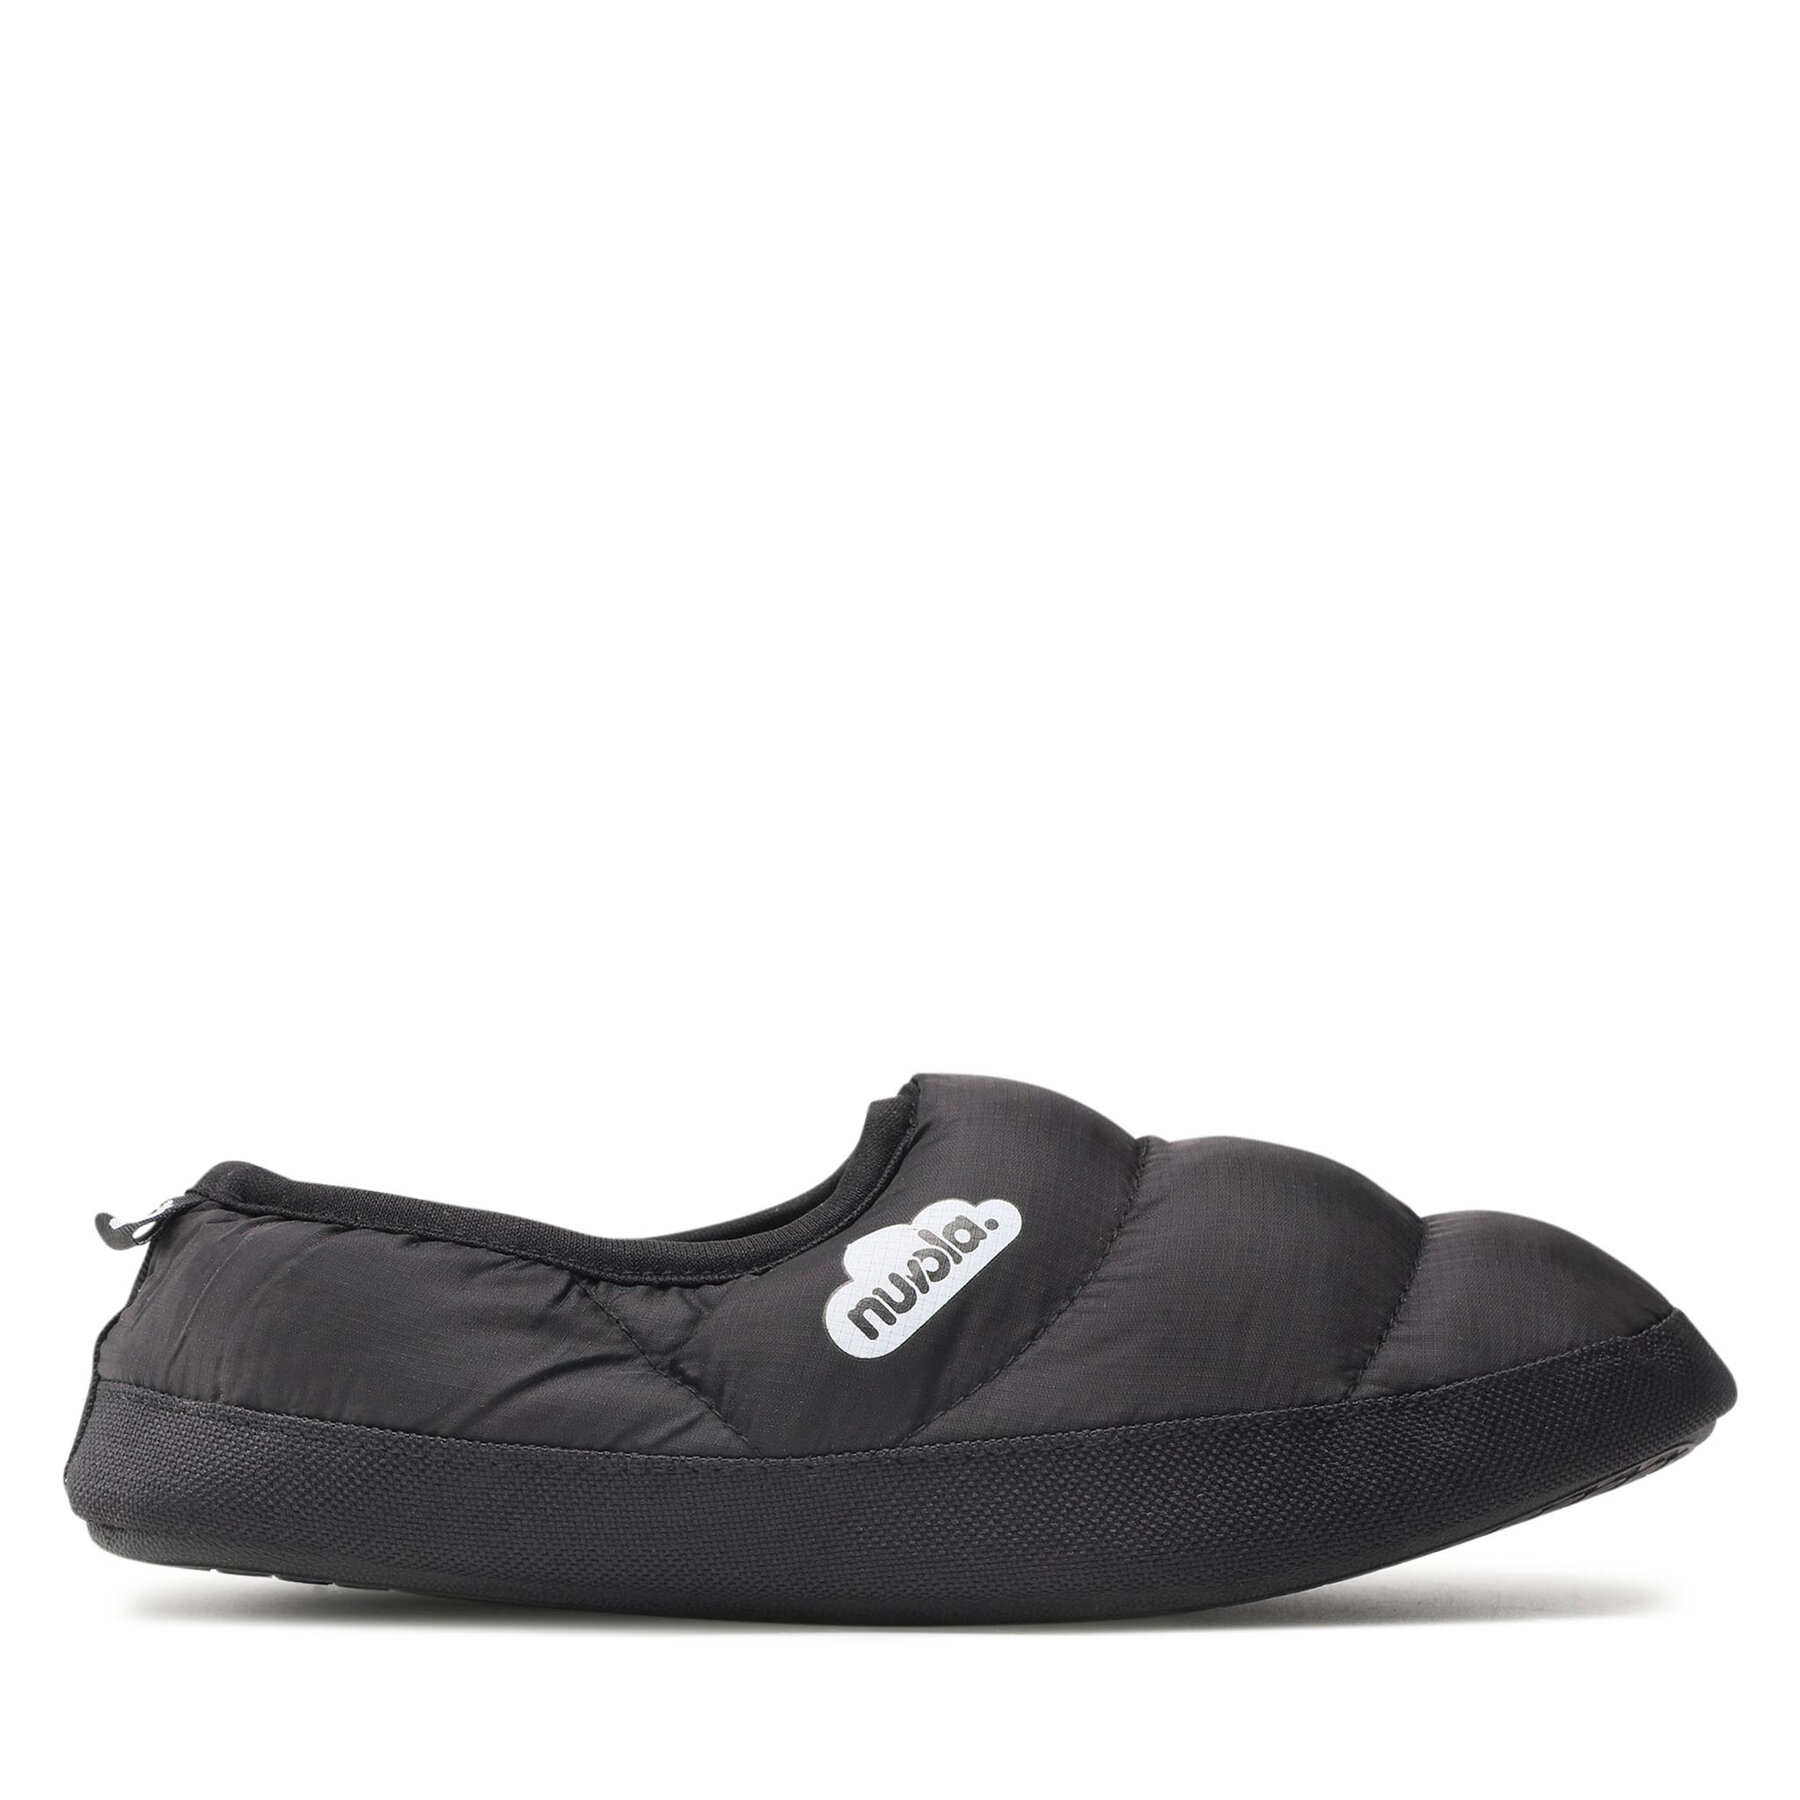 nuvola UNCLAG Slippers black